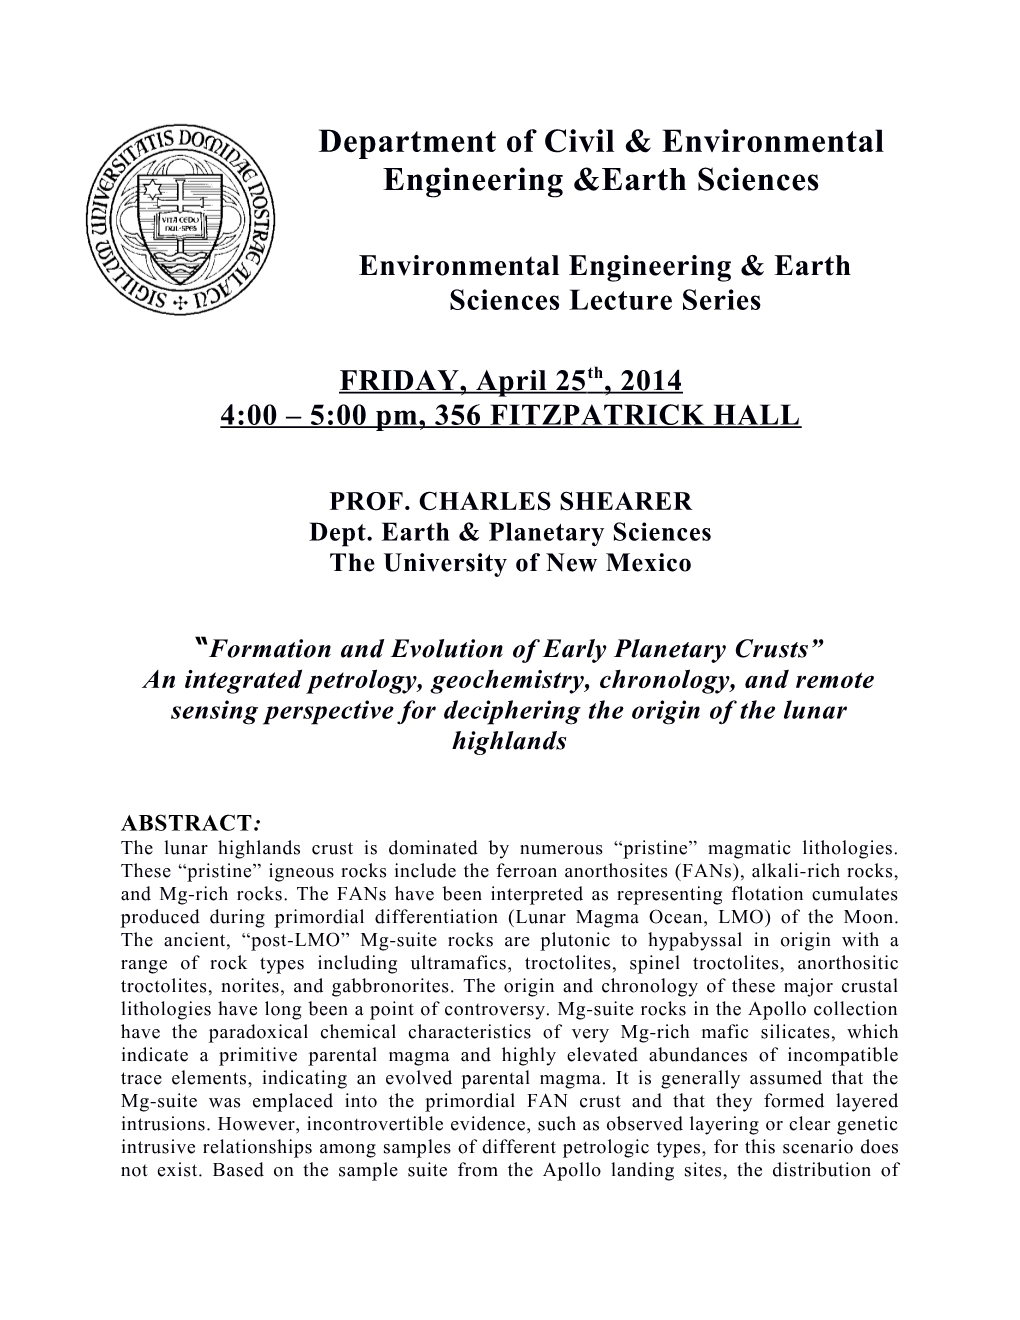 Environmental Engineering & Earth Sciences Lecture Series